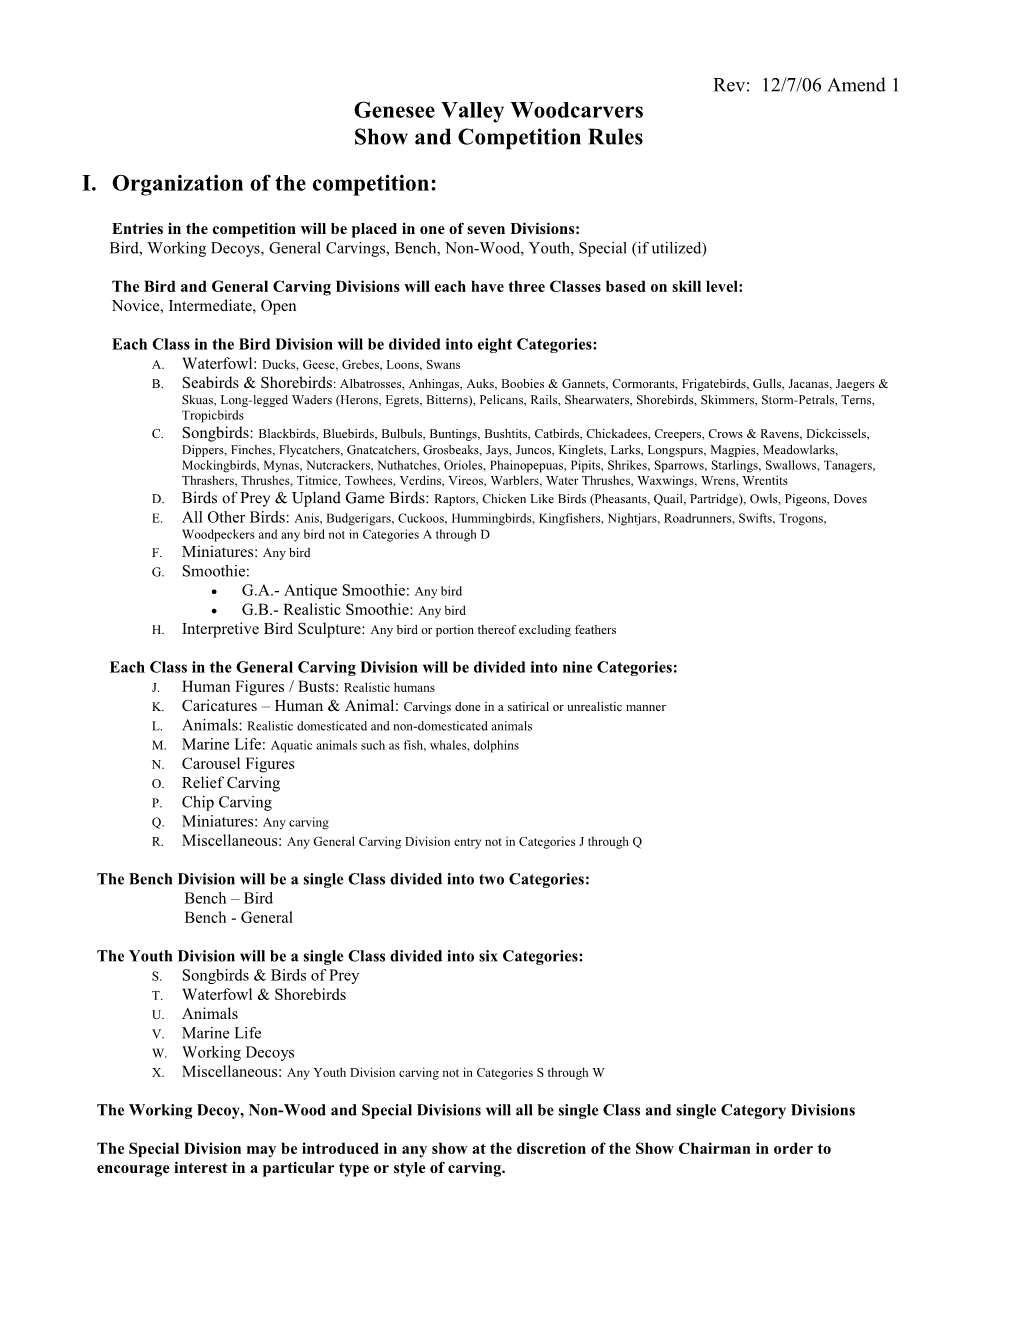 Show and Competition Rules